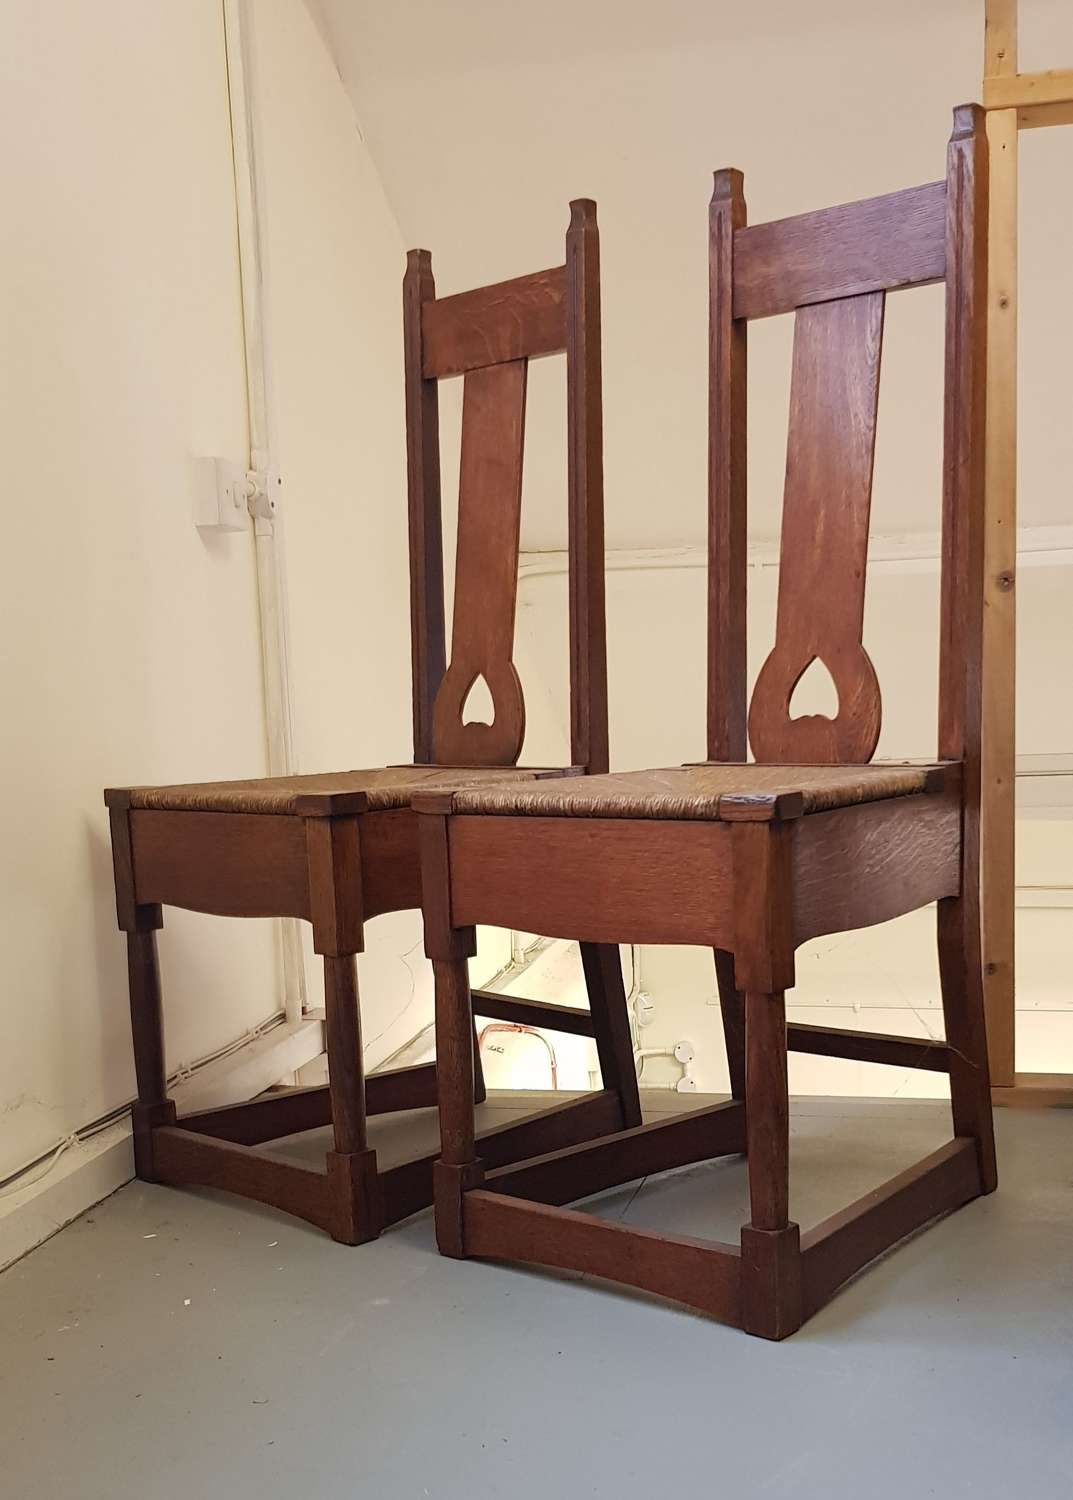 Pair of Wylie & Lochhead Arts & Crafts occasional chairs